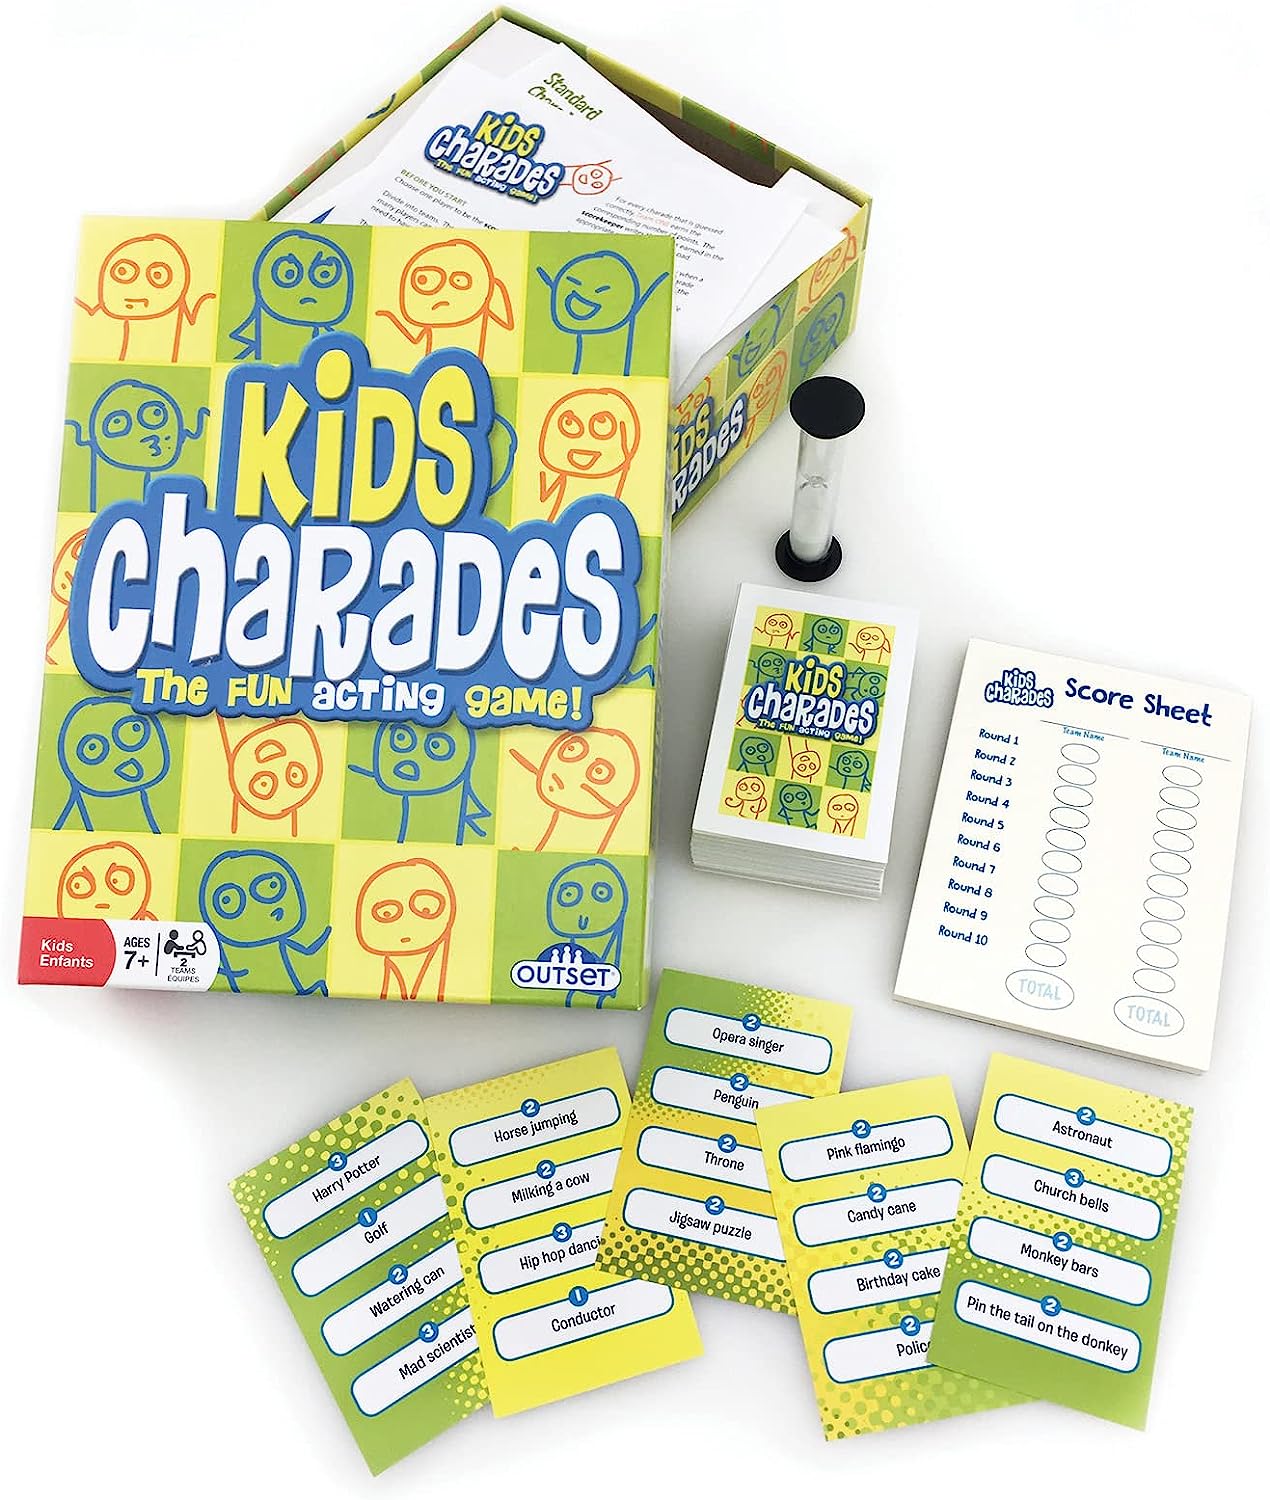 Outset Kids Charades - Children's Game - Family Game - Features 300 Charades - Develops Critical Thinking, Builds Imagination, and Supports Creativity - for 3 or More Players - Ages 8+